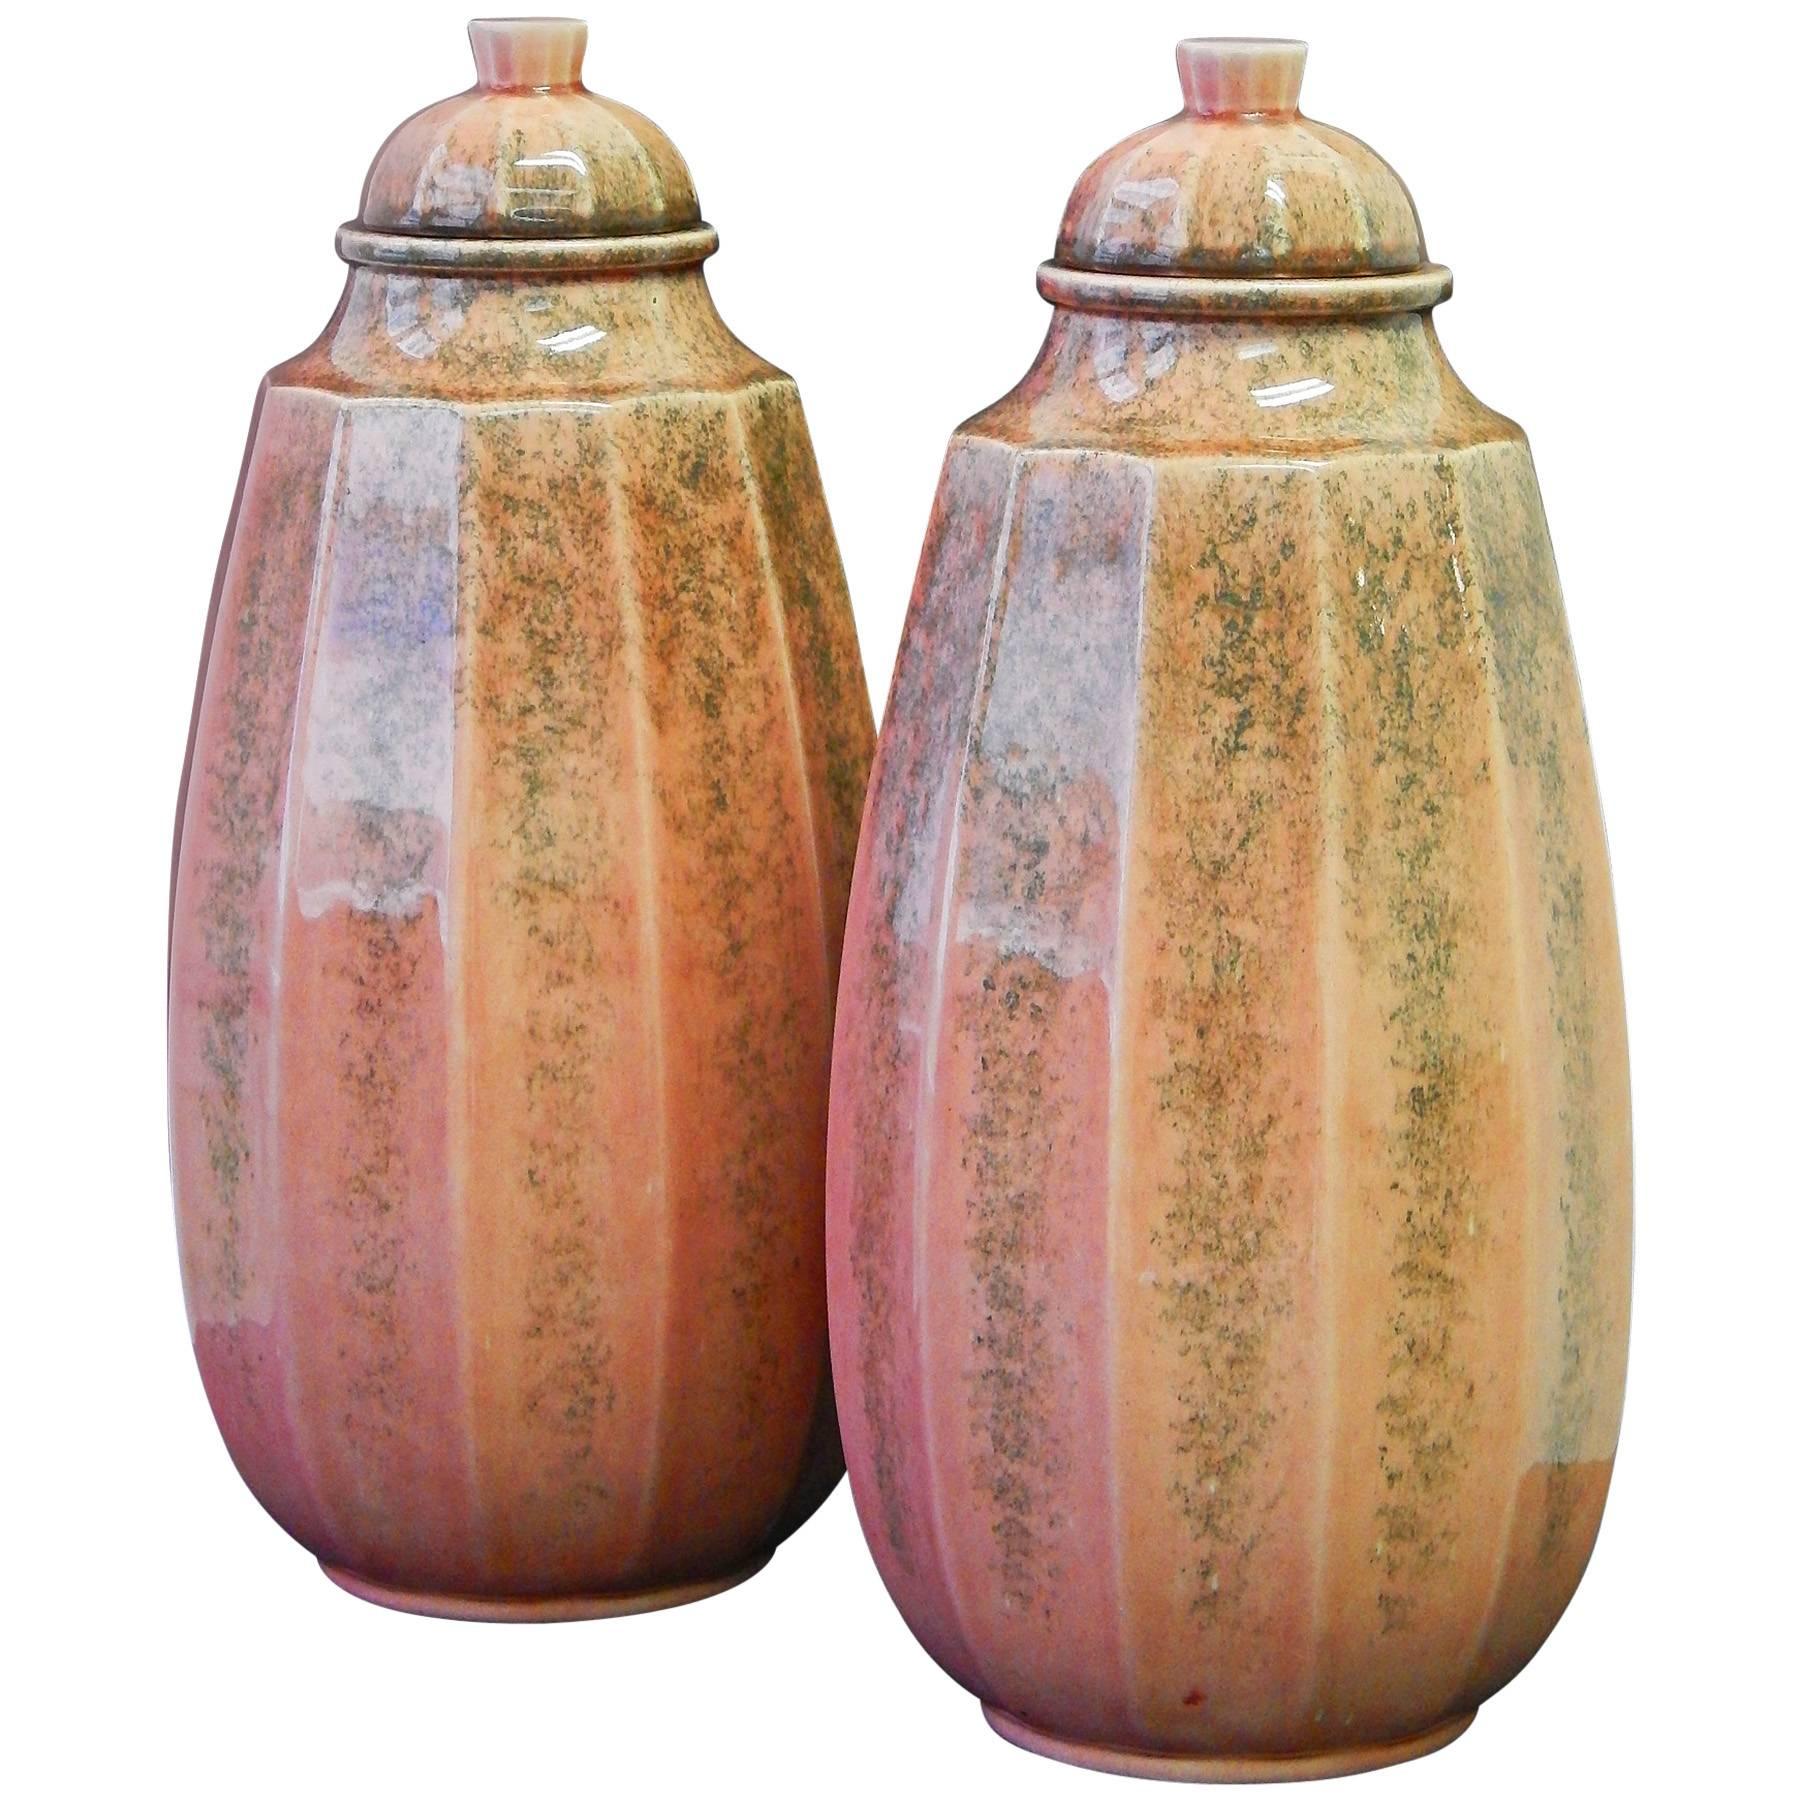 Rare Pair of Tall, Art Deco Lidded Urns by Paul Milet, Sevres